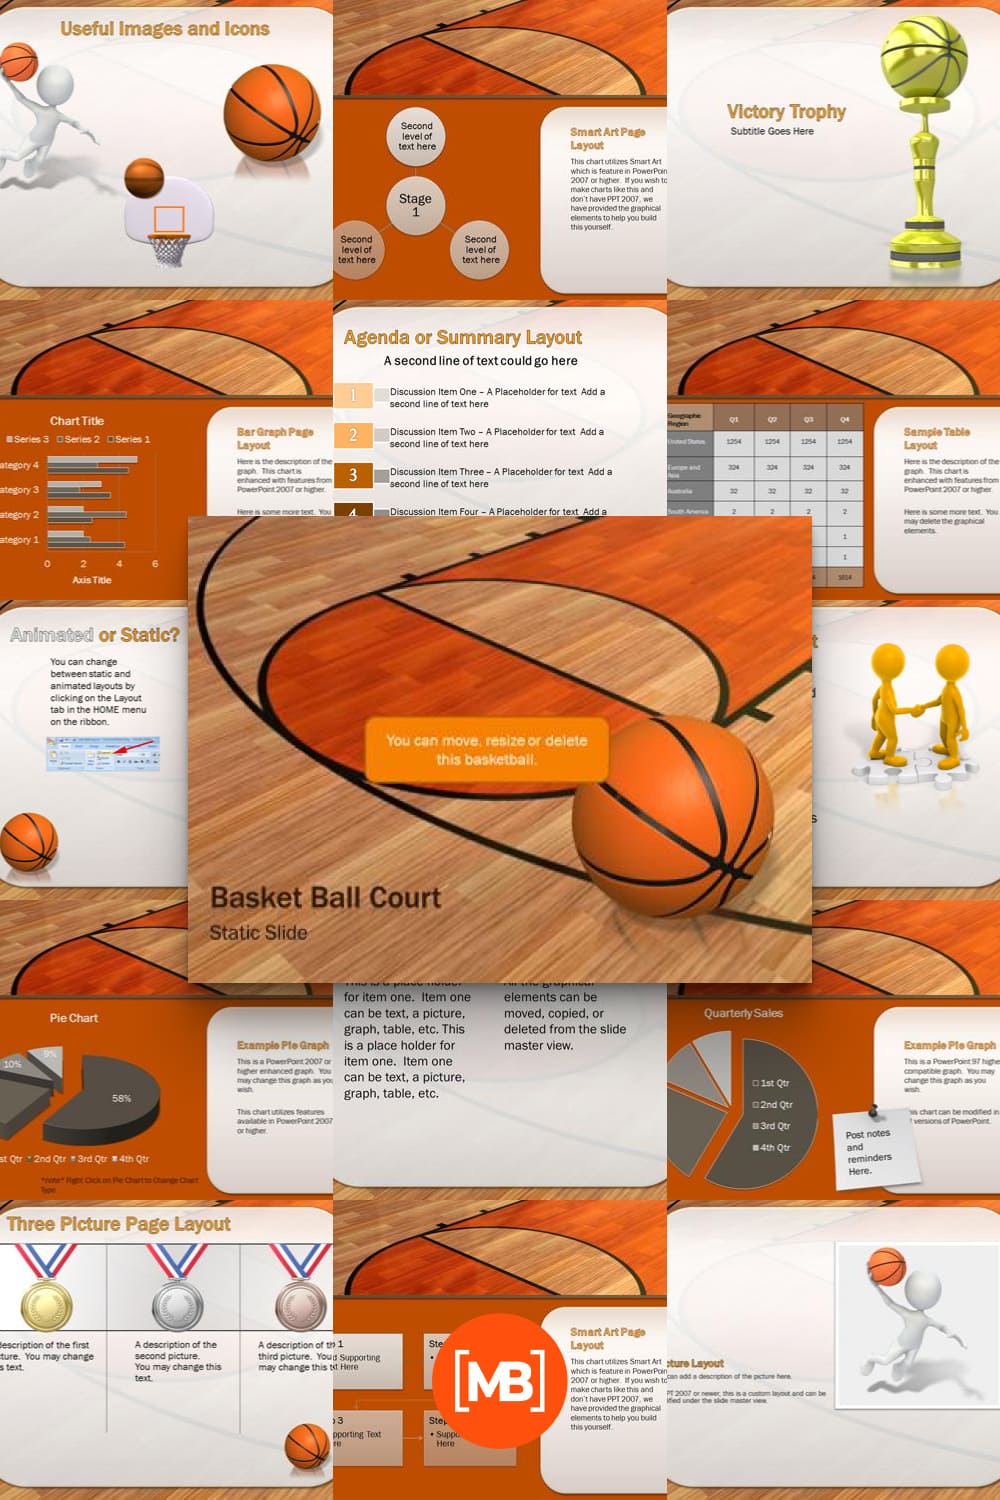 This PowerPoint shows animated basketballs bouncing on a basketball court.